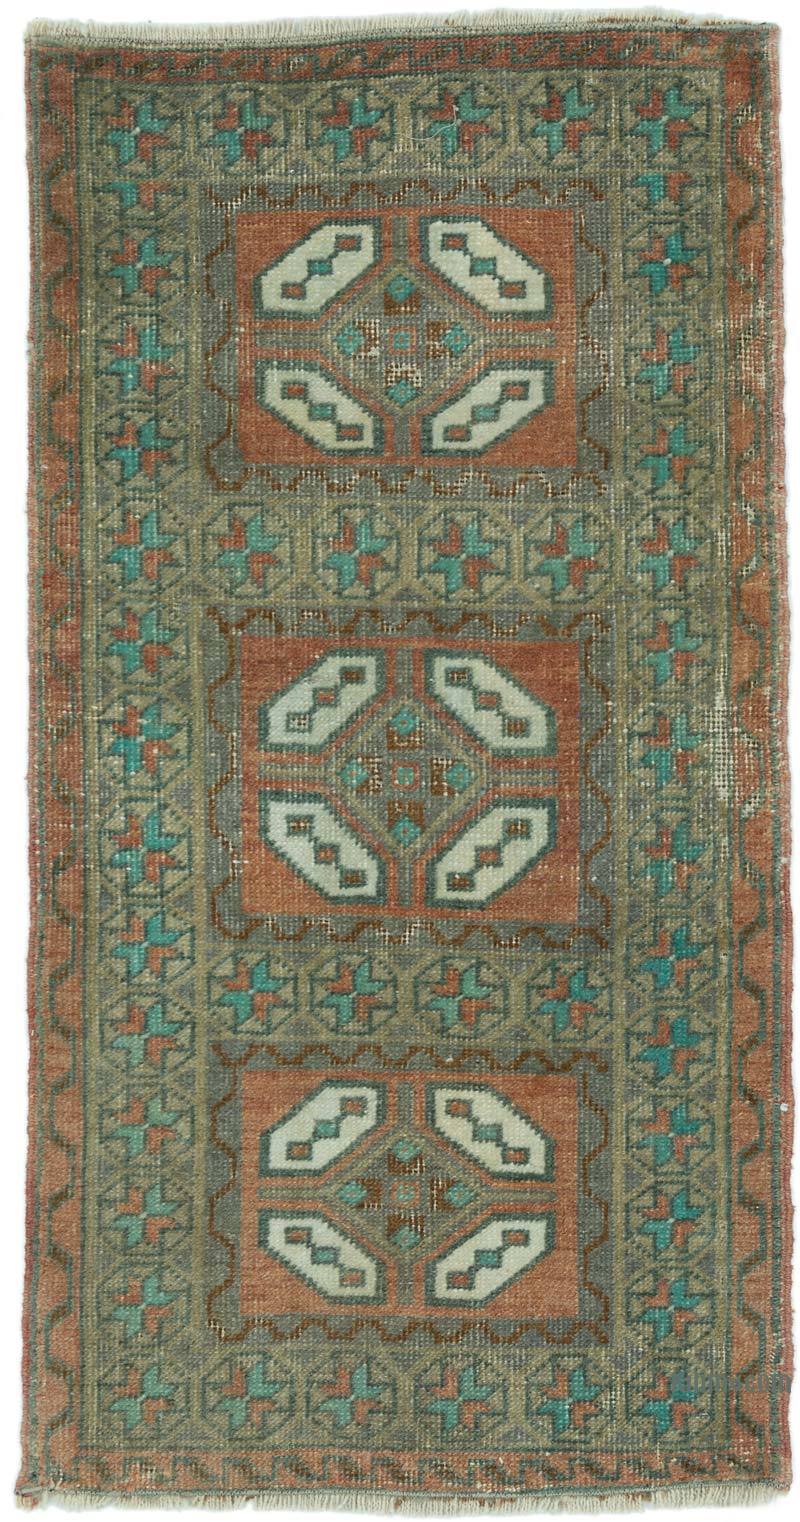 Vintage Turkish Hand-Knotted Rug - 1' 6" x 2' 10" (18 in. x 34 in.) - K0052846